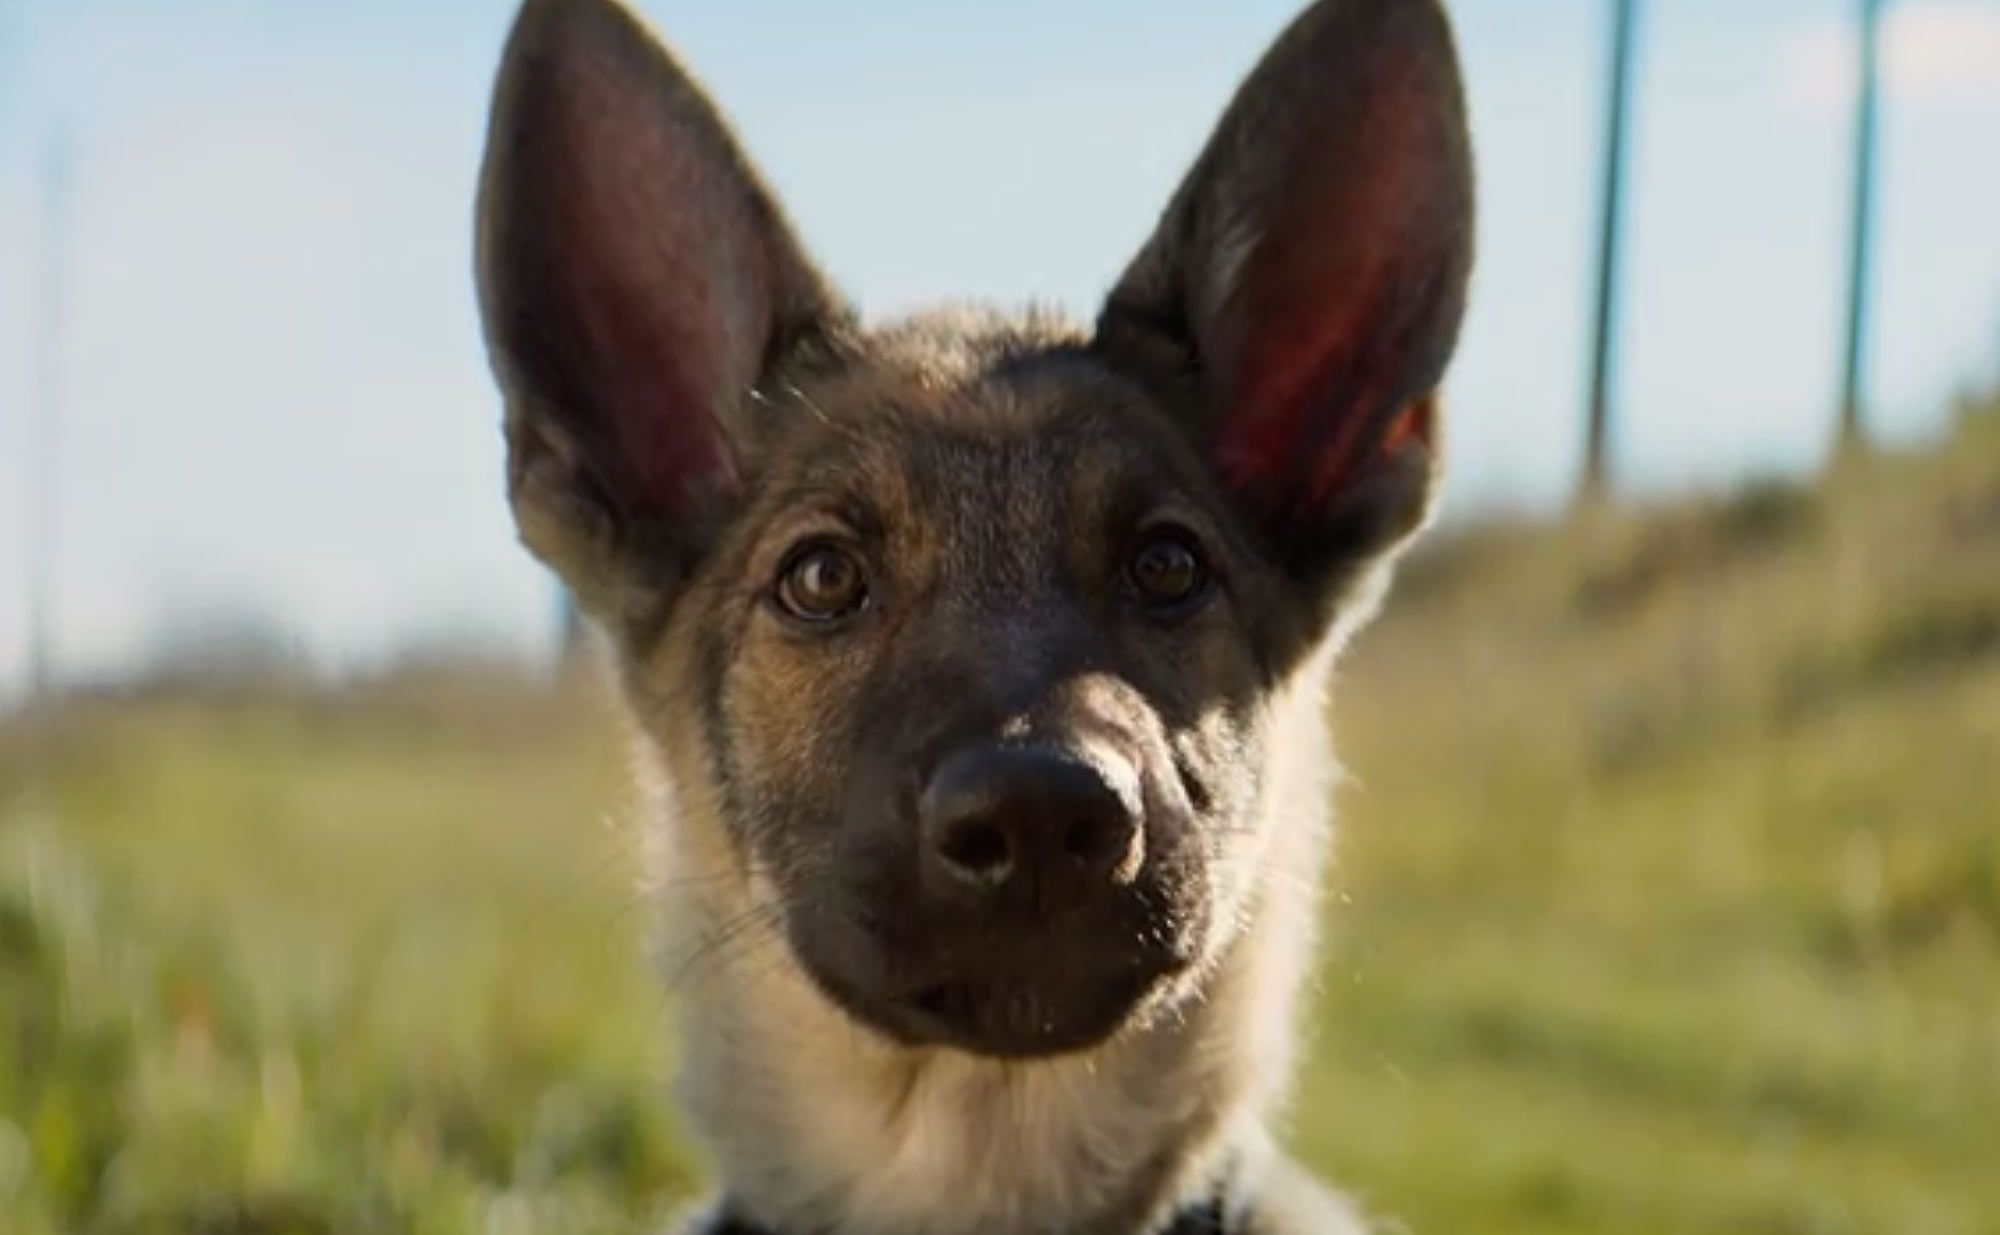 A Dog's Purpose Video Shows German Shepherd Being Forced Into Churning Waters